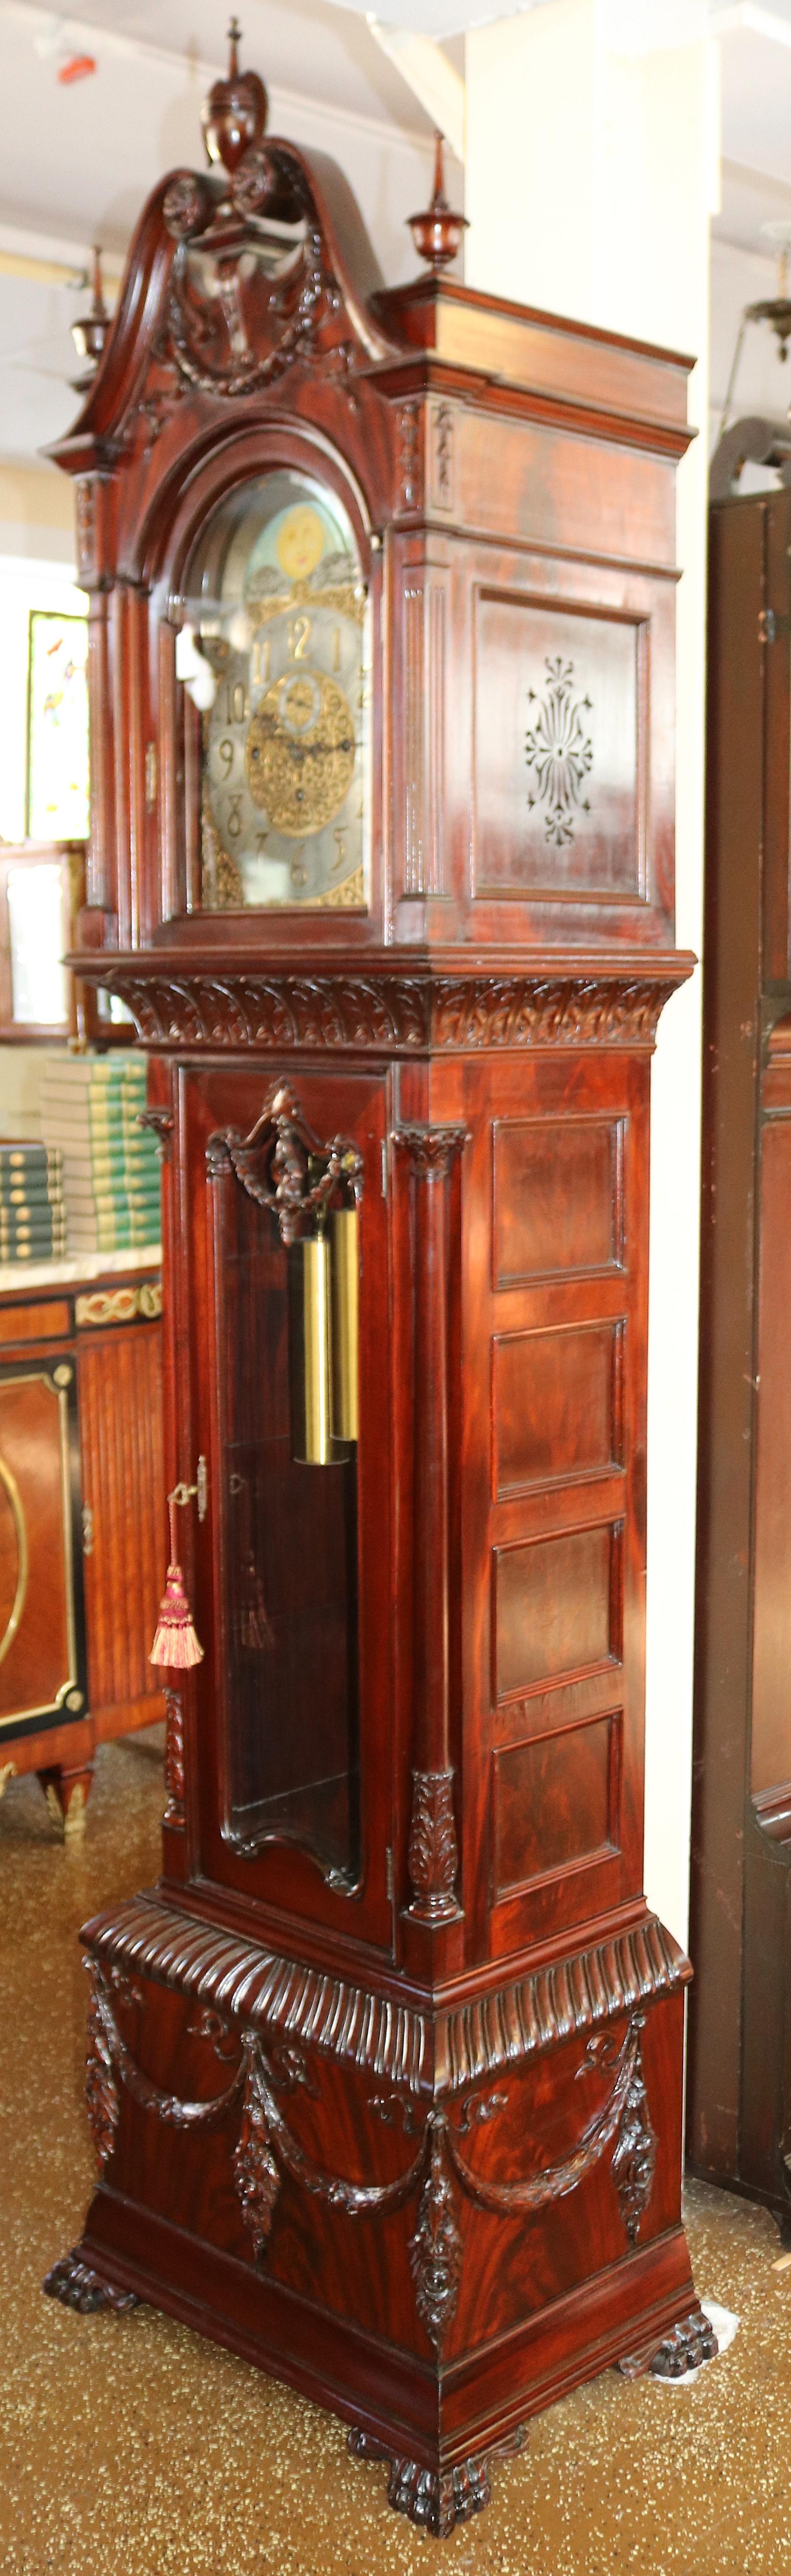 Late 19th Century Carved Mahogany 9 Tube Musical Tall Case Grandfather Clock 1